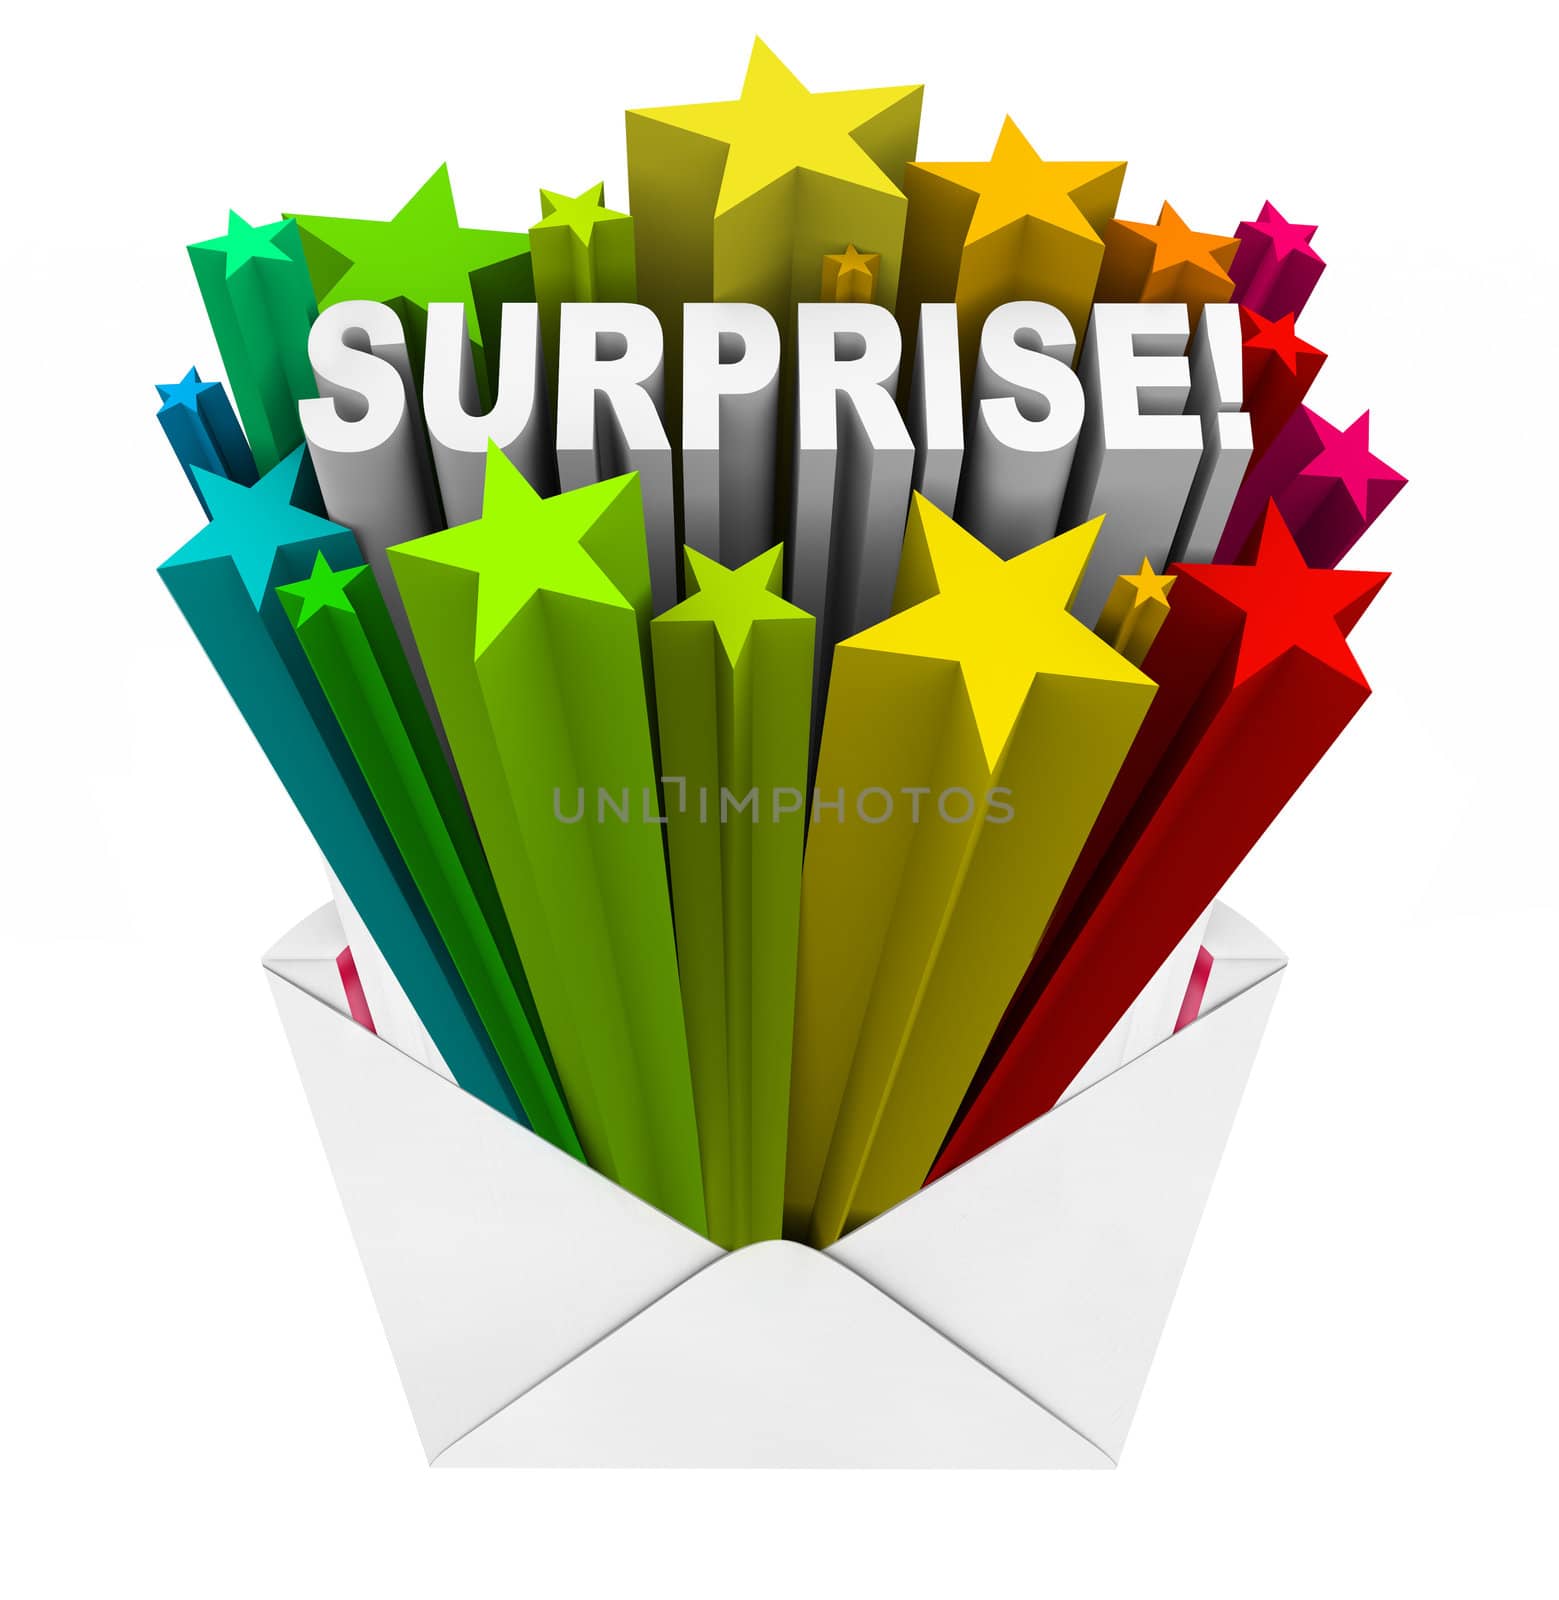 The word Surprise bursts with a bunch of colorful stars out of an open envelope to announce an unpredictable, fun, surprising announcement or message